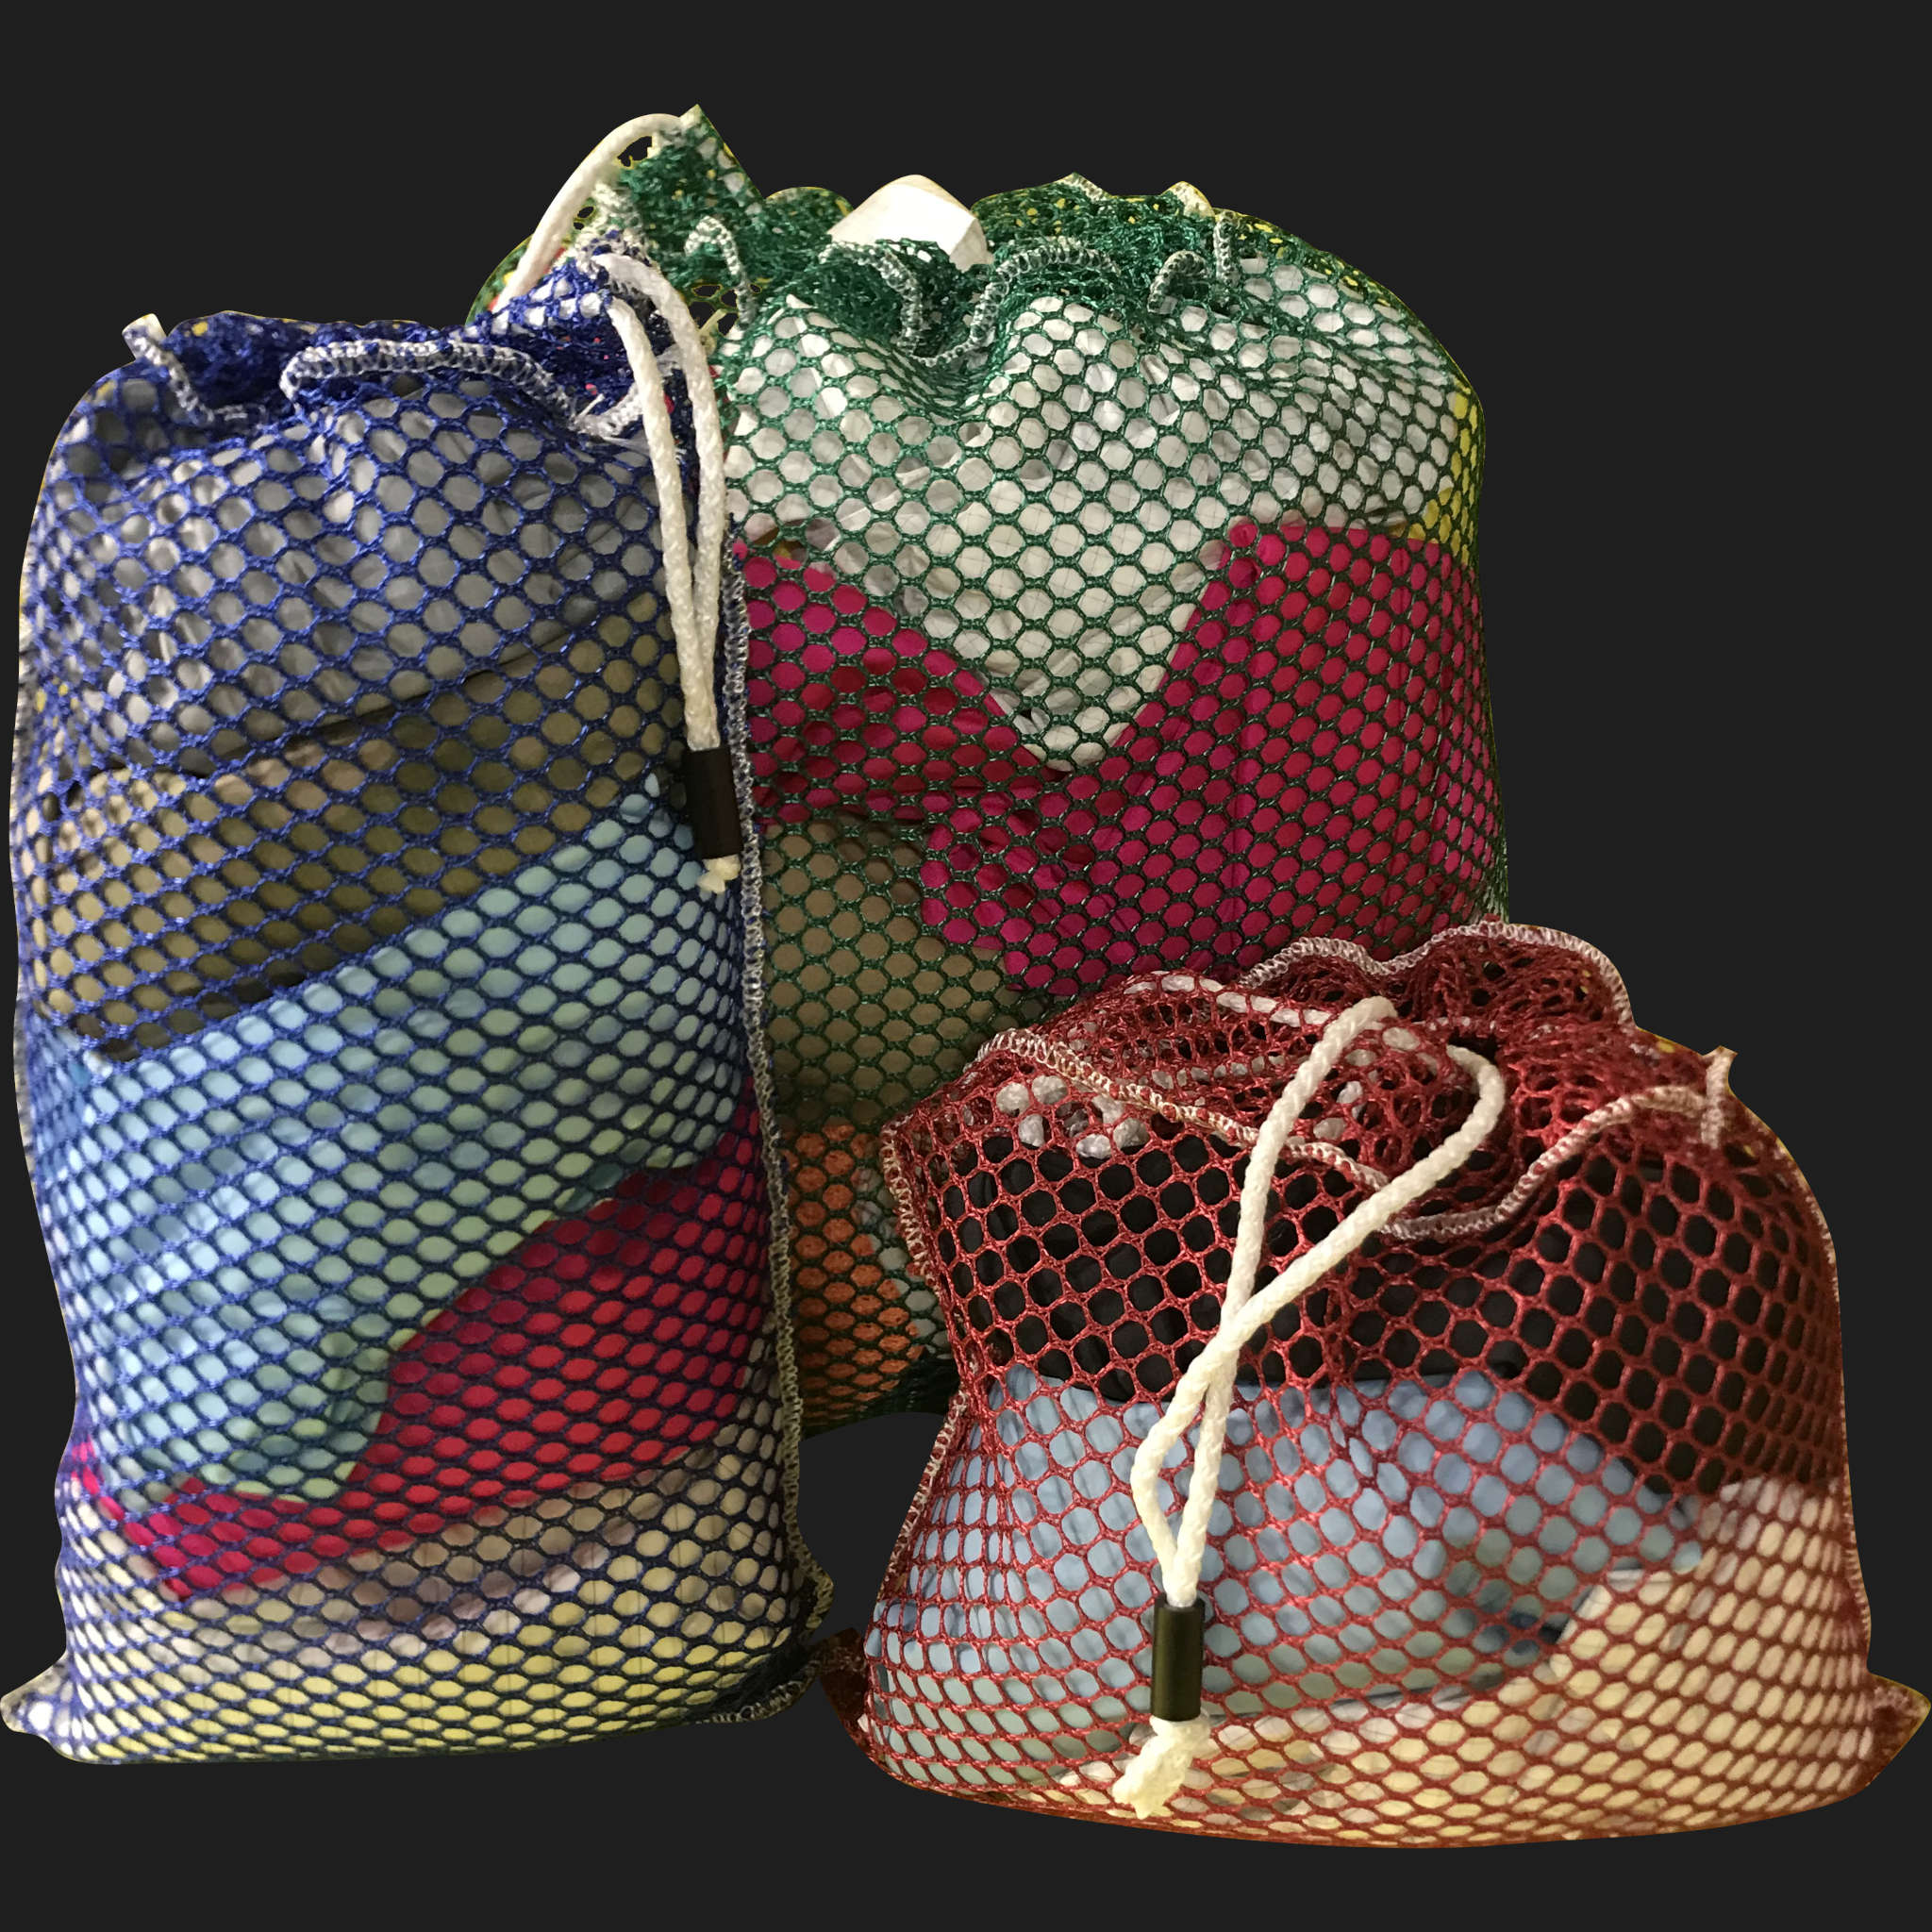 30" x 52" Customized Mesh-Net-Laundry Bags Heavy Duty with Cord and barrellock closure